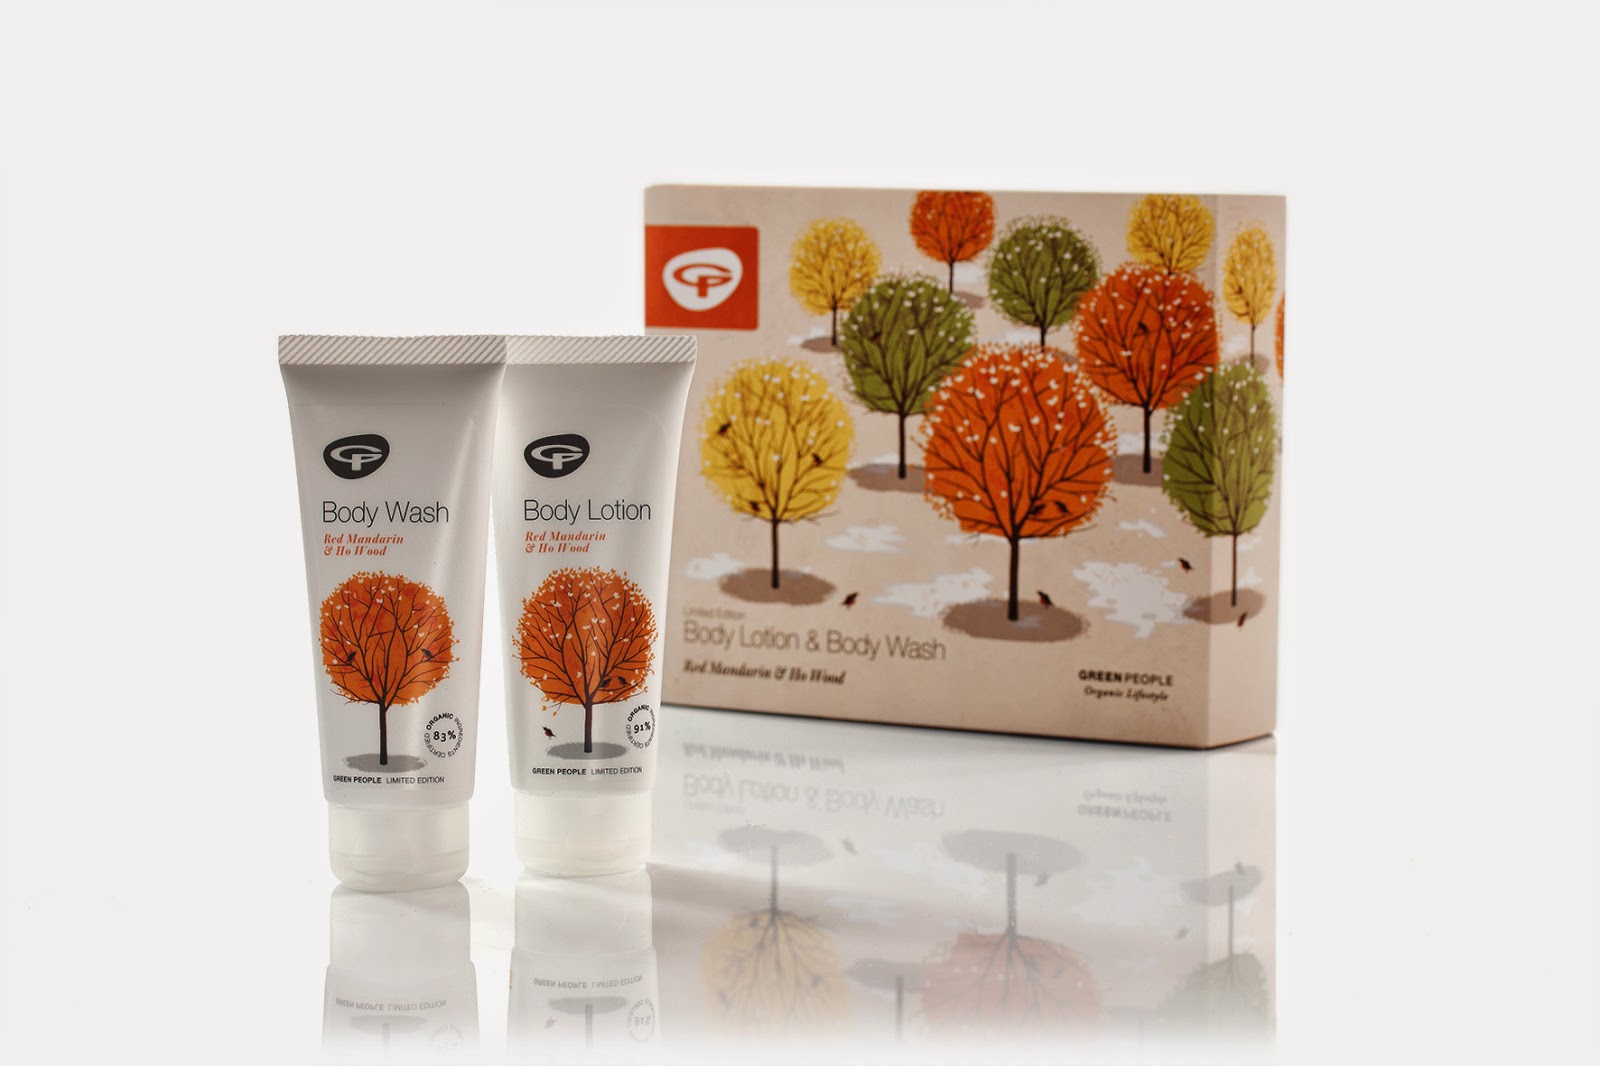 Limited Edition Gift Set from The Green People